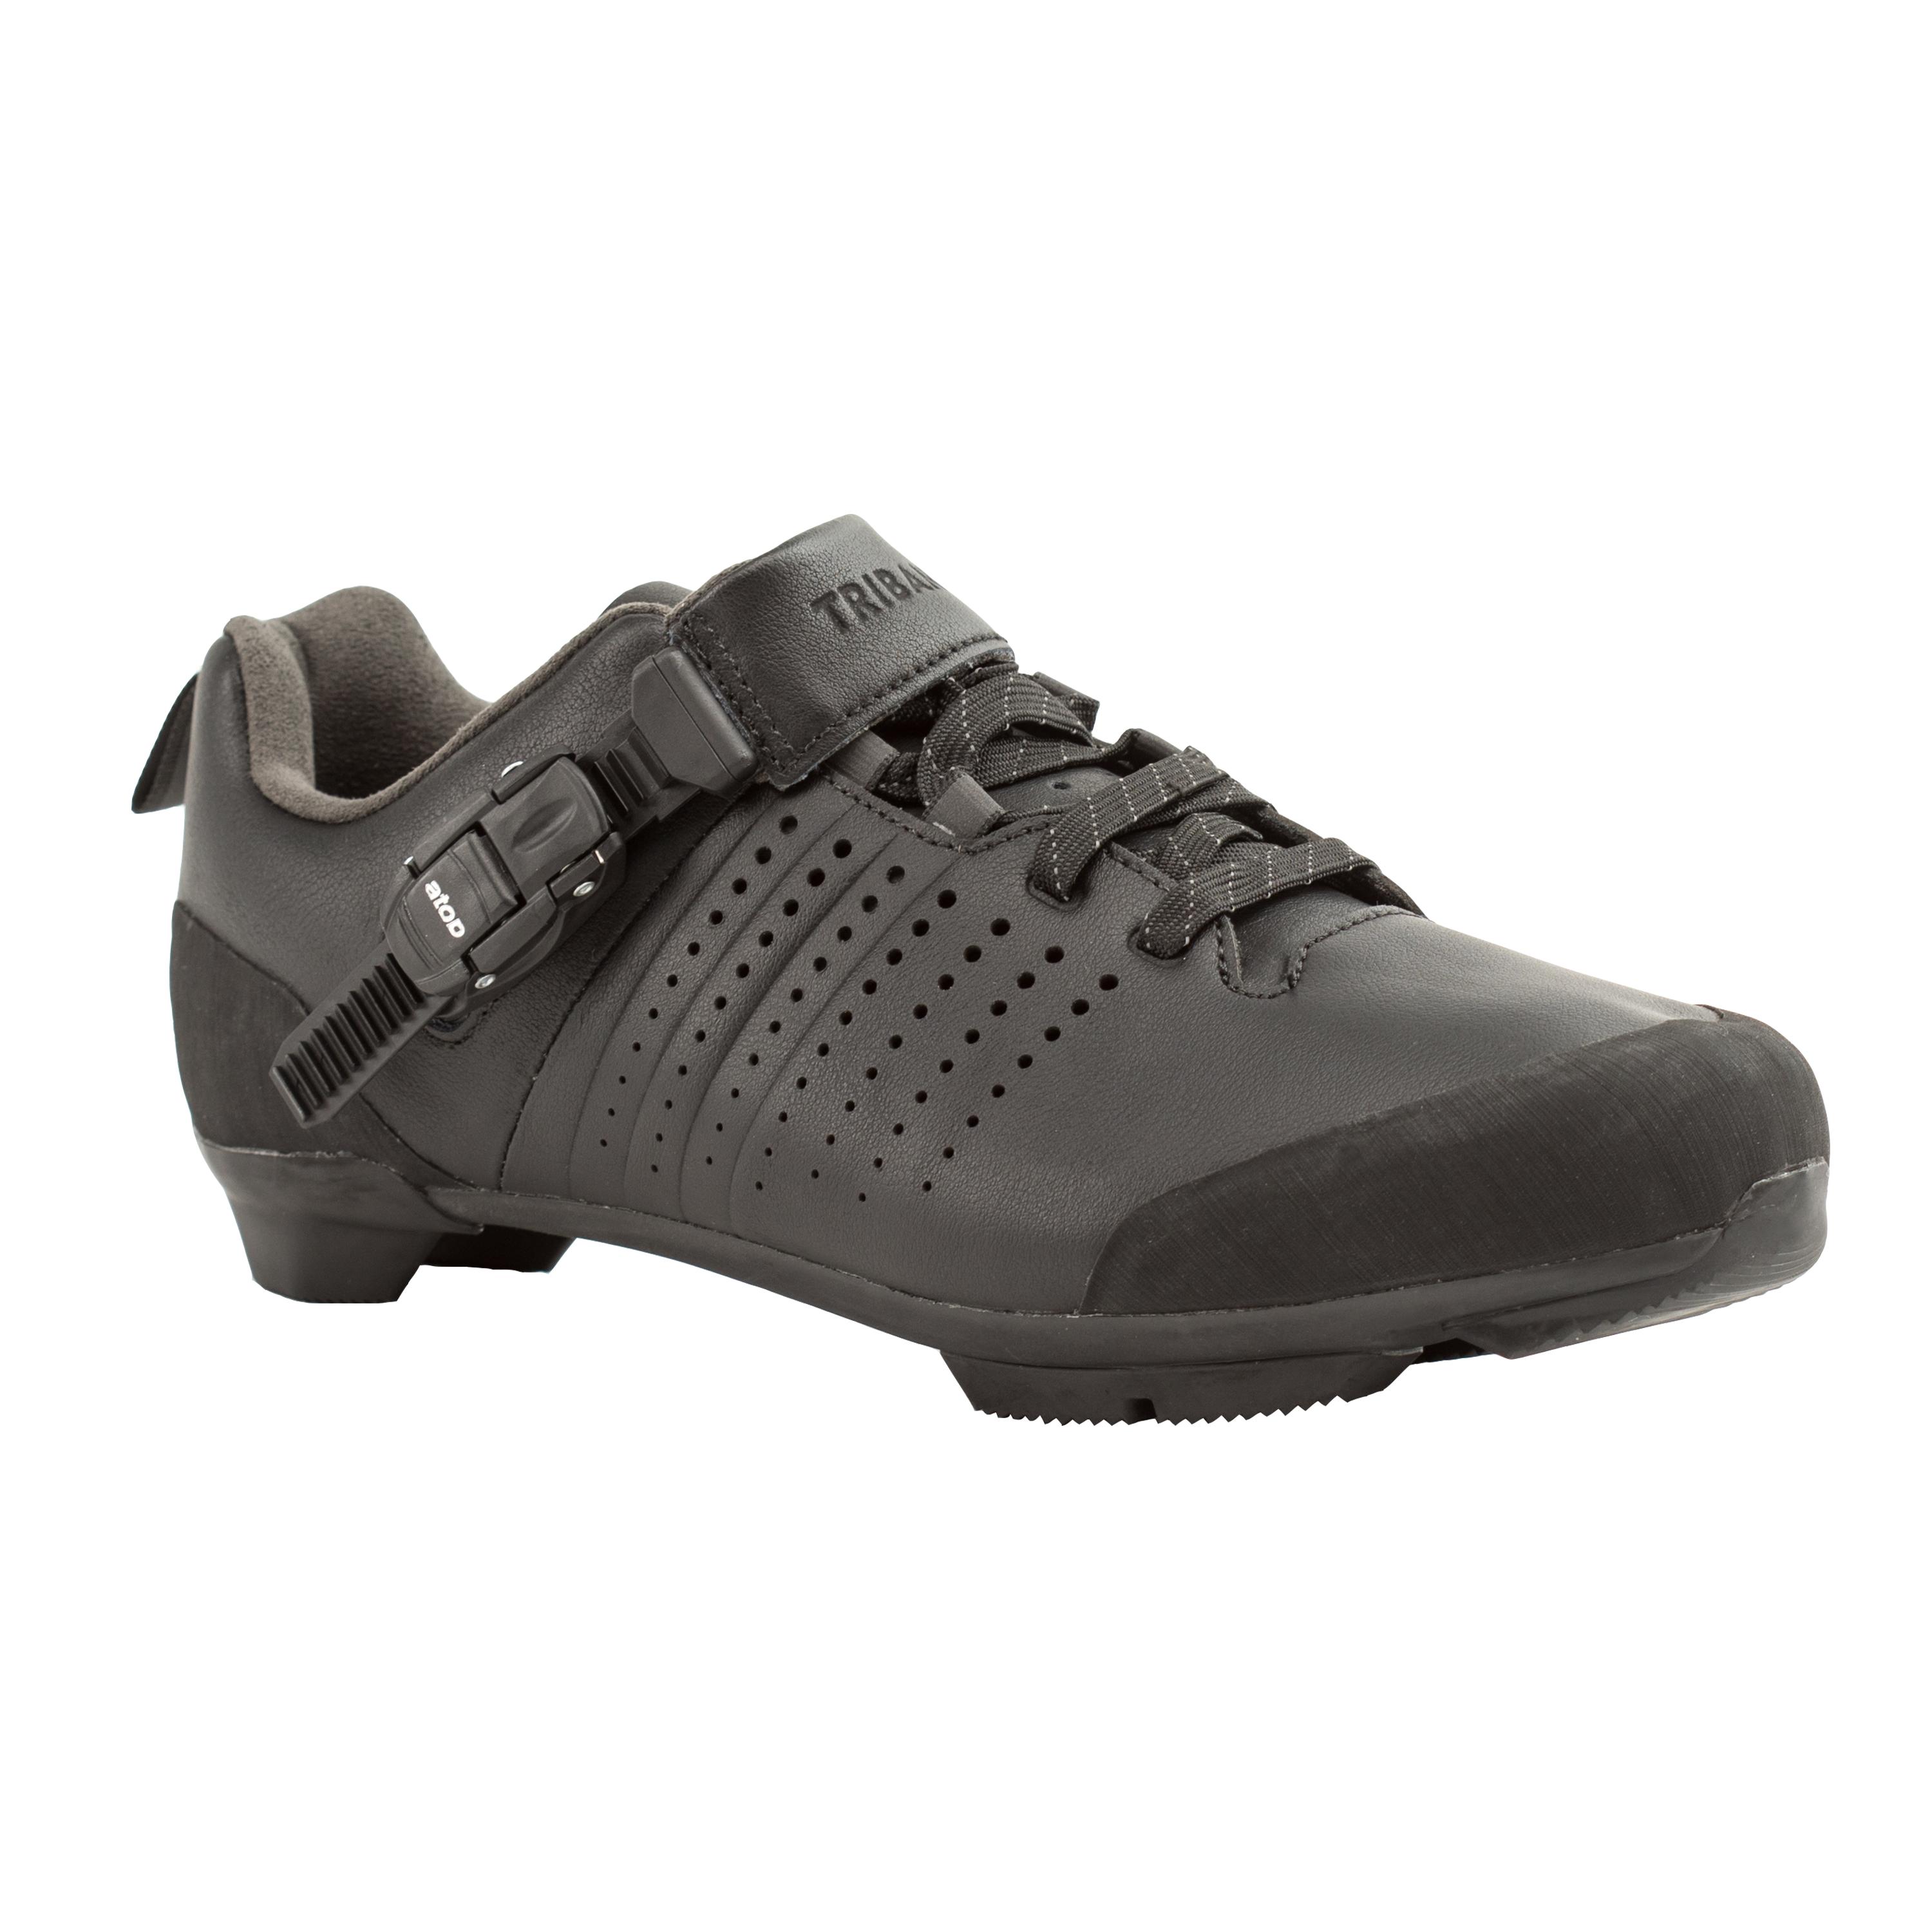 Image of Leather Lace-Up Cycling Shoes - GRVL 520 SPD Black